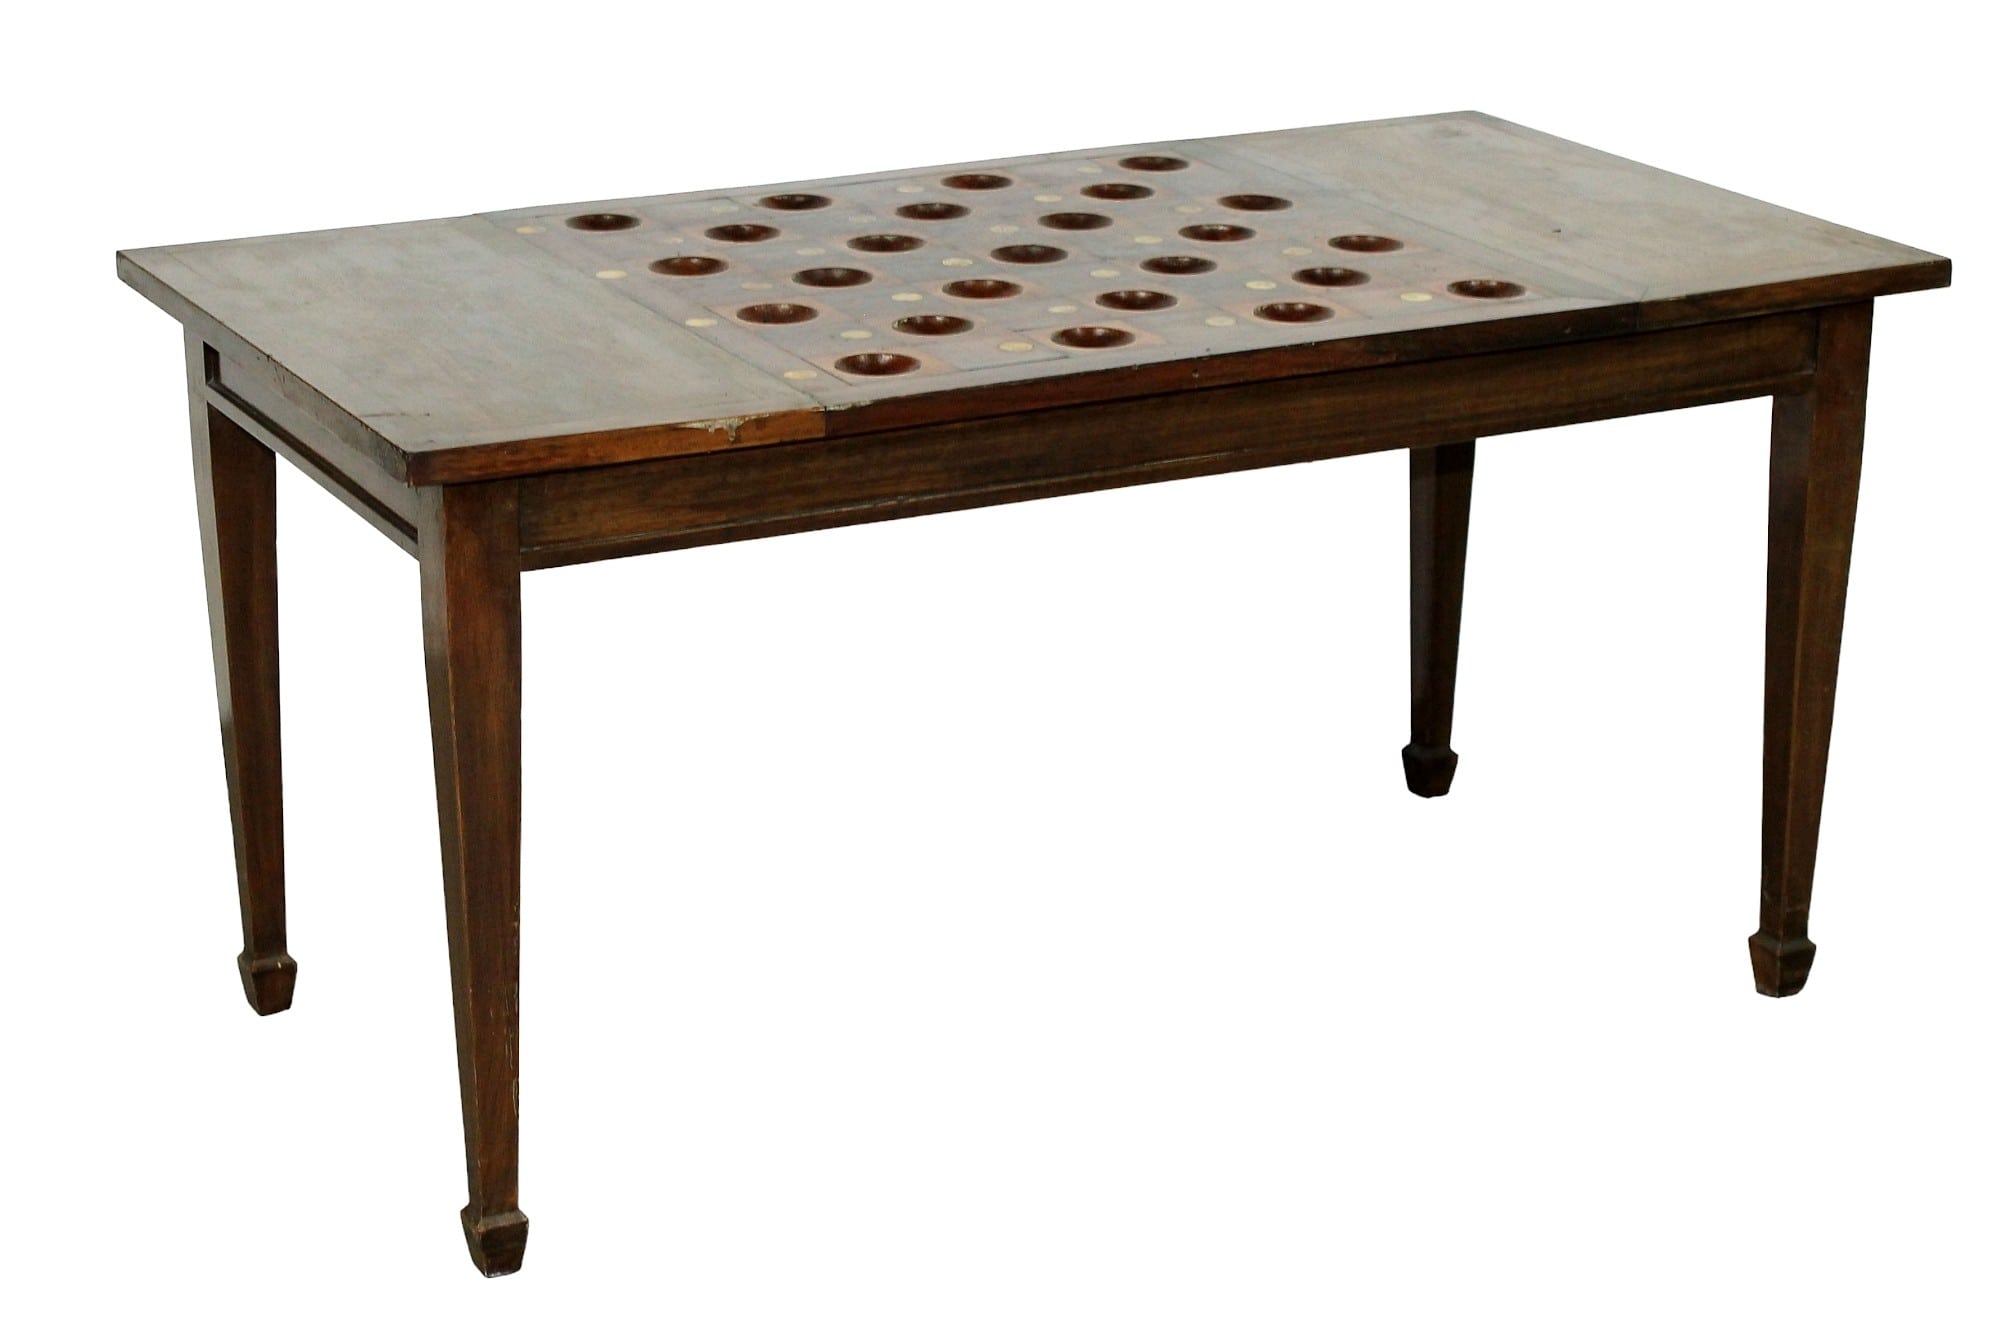 French mid century coffee table with game board